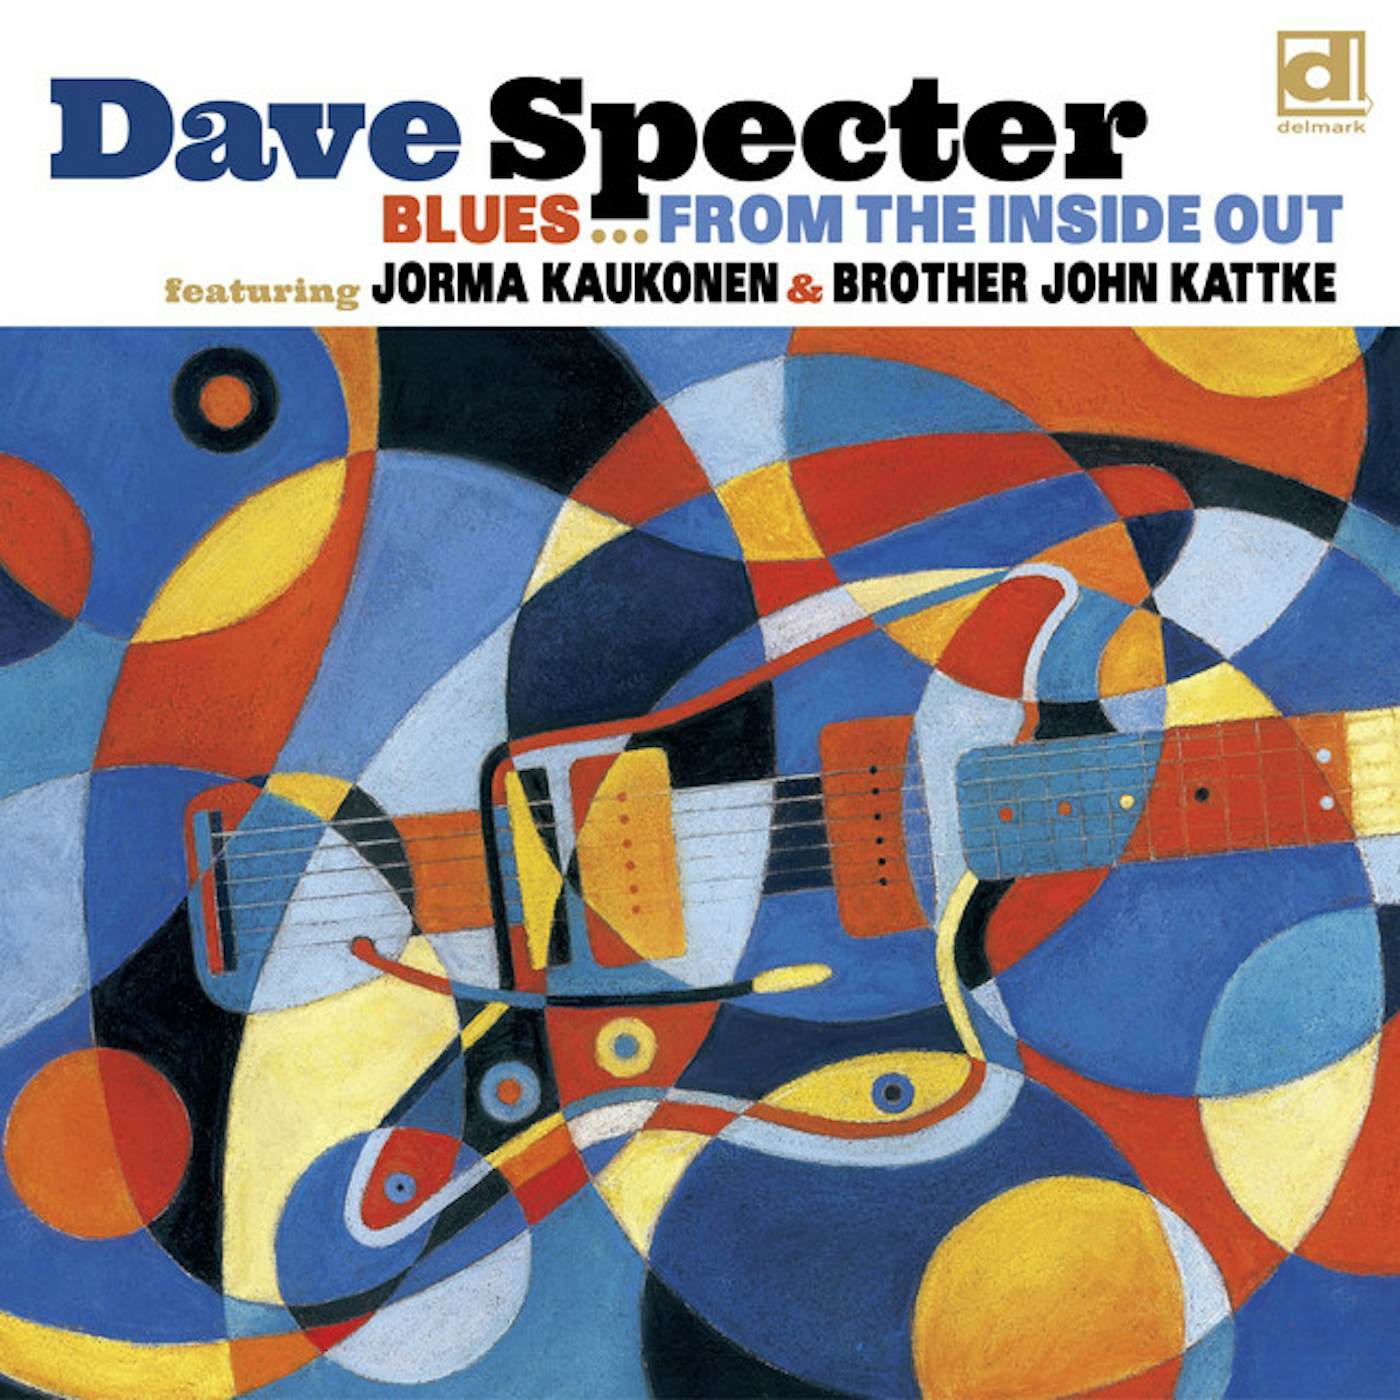 Dave Specter BLUES FROM THE INSIDE OUT CD